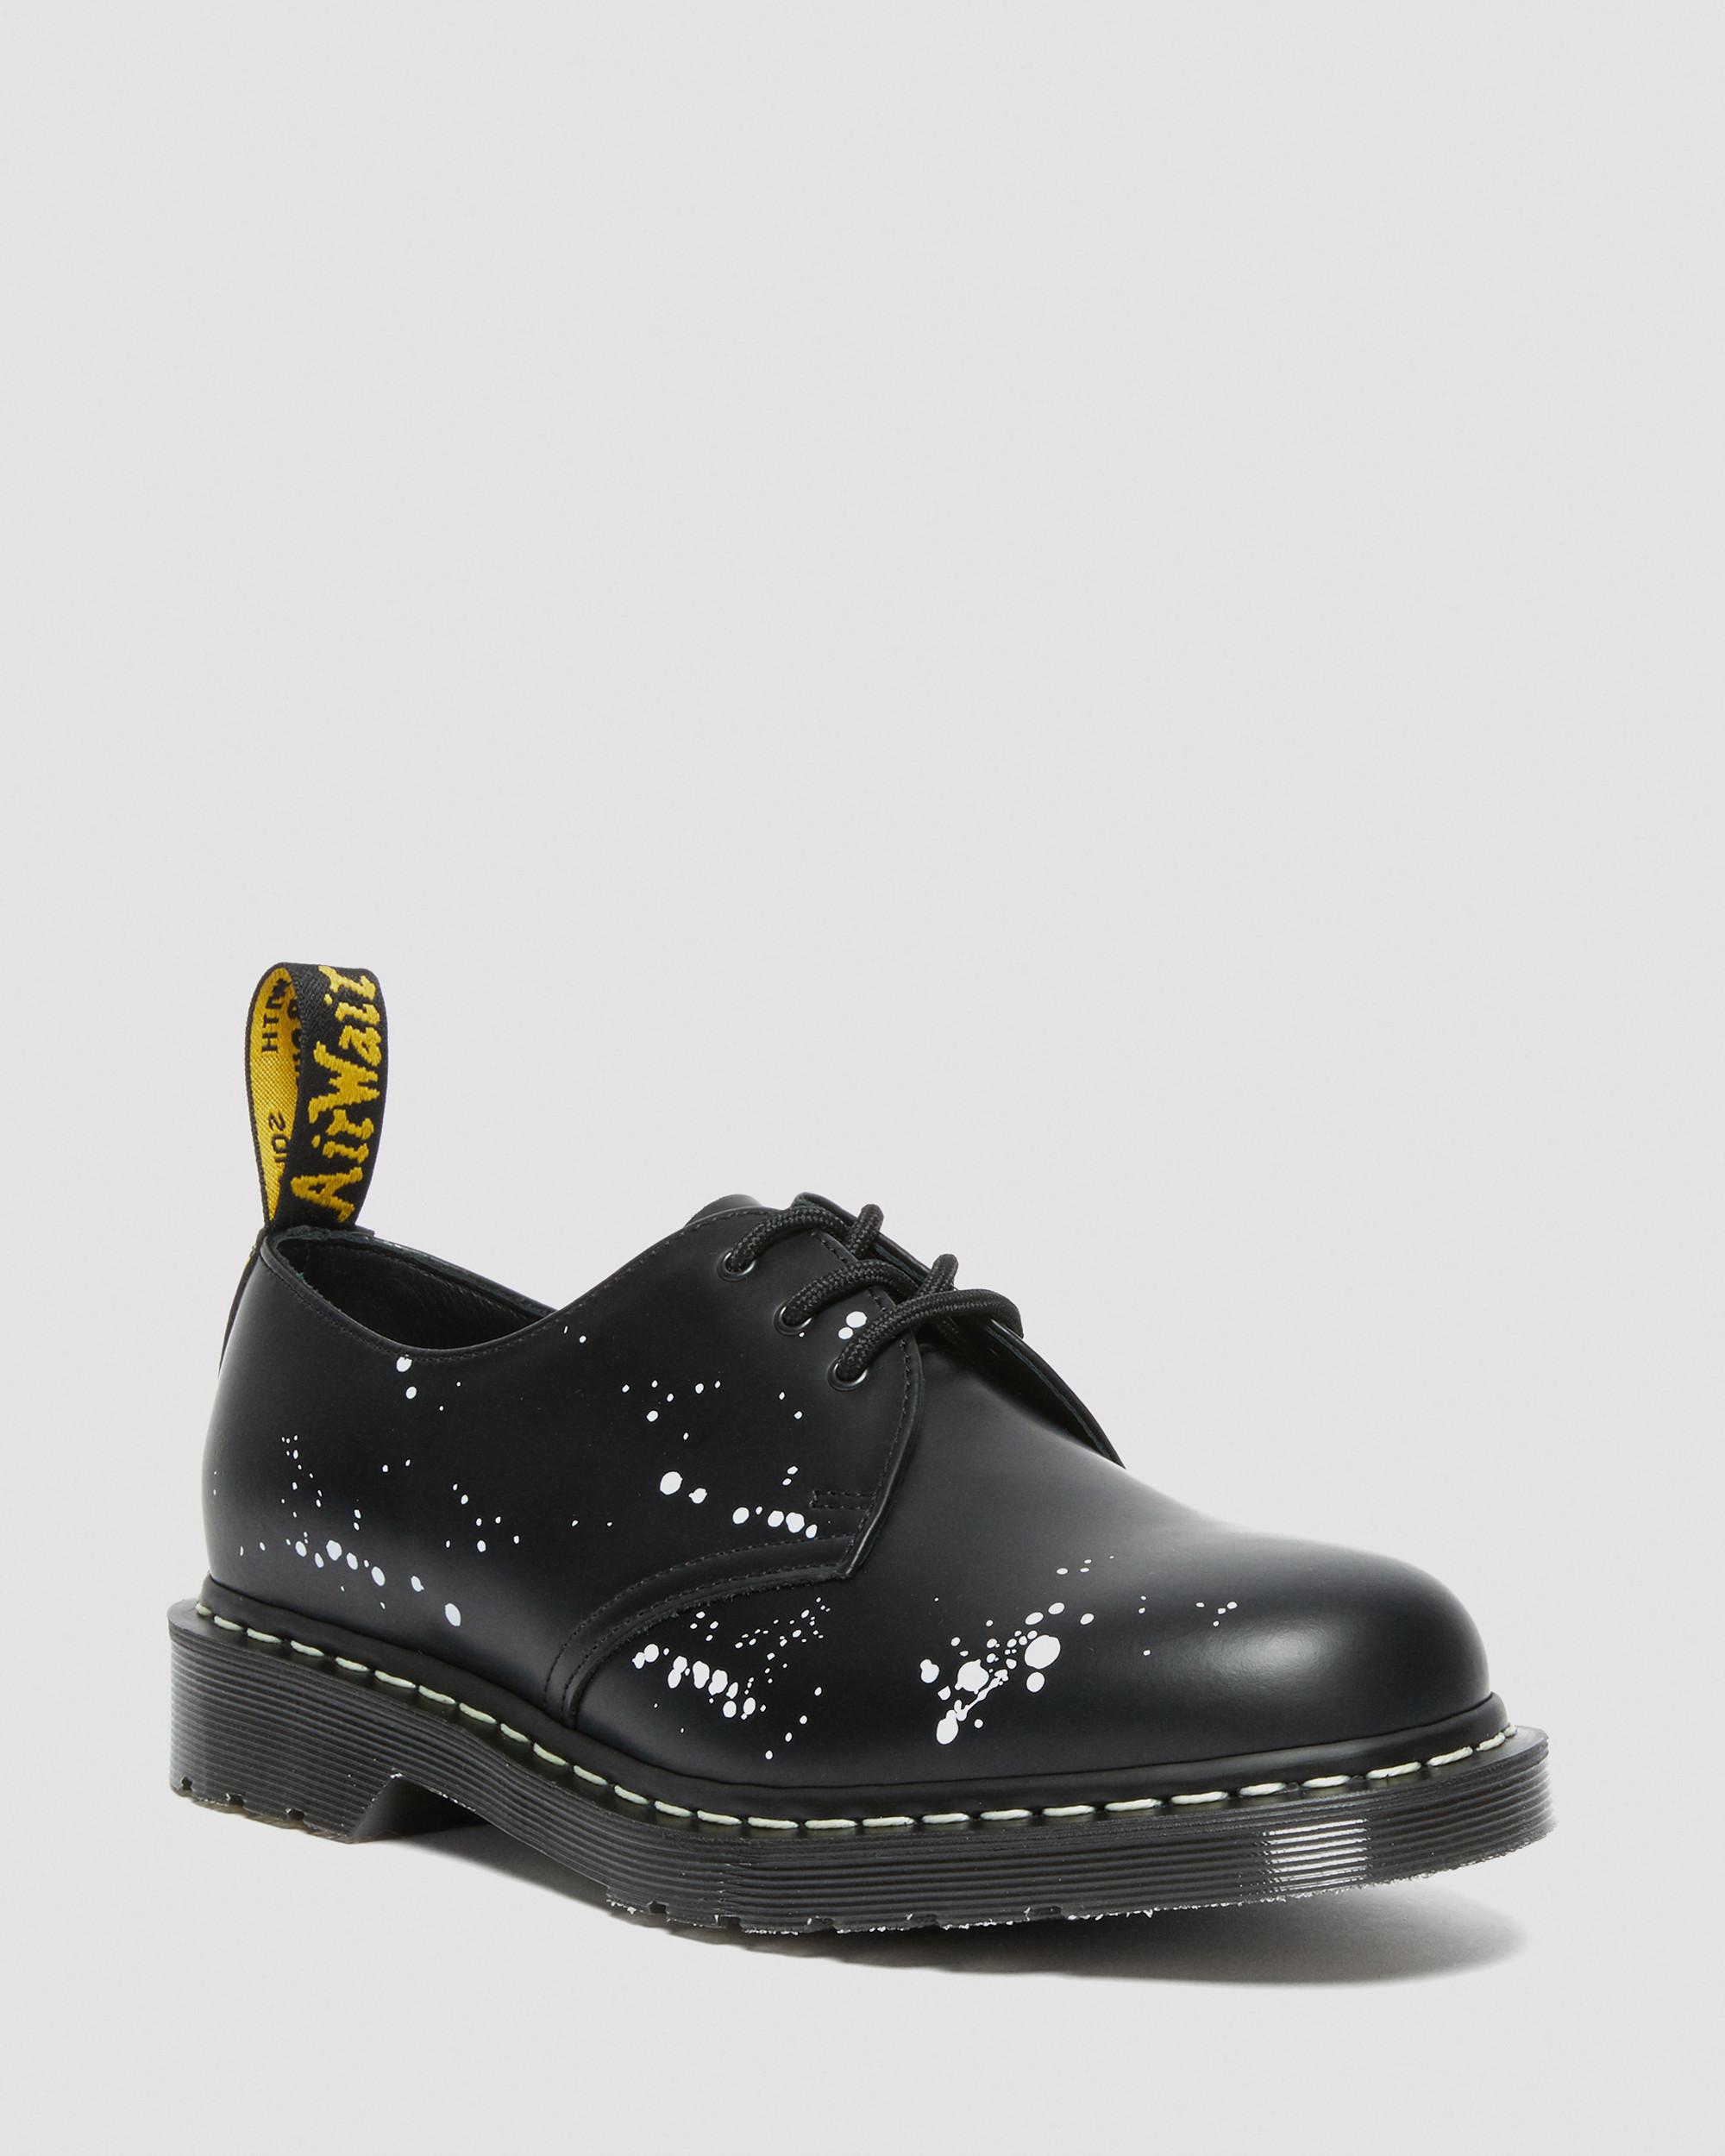 DR MARTENS 1461 Neighborhood Smooth Leather Oxford Shoes